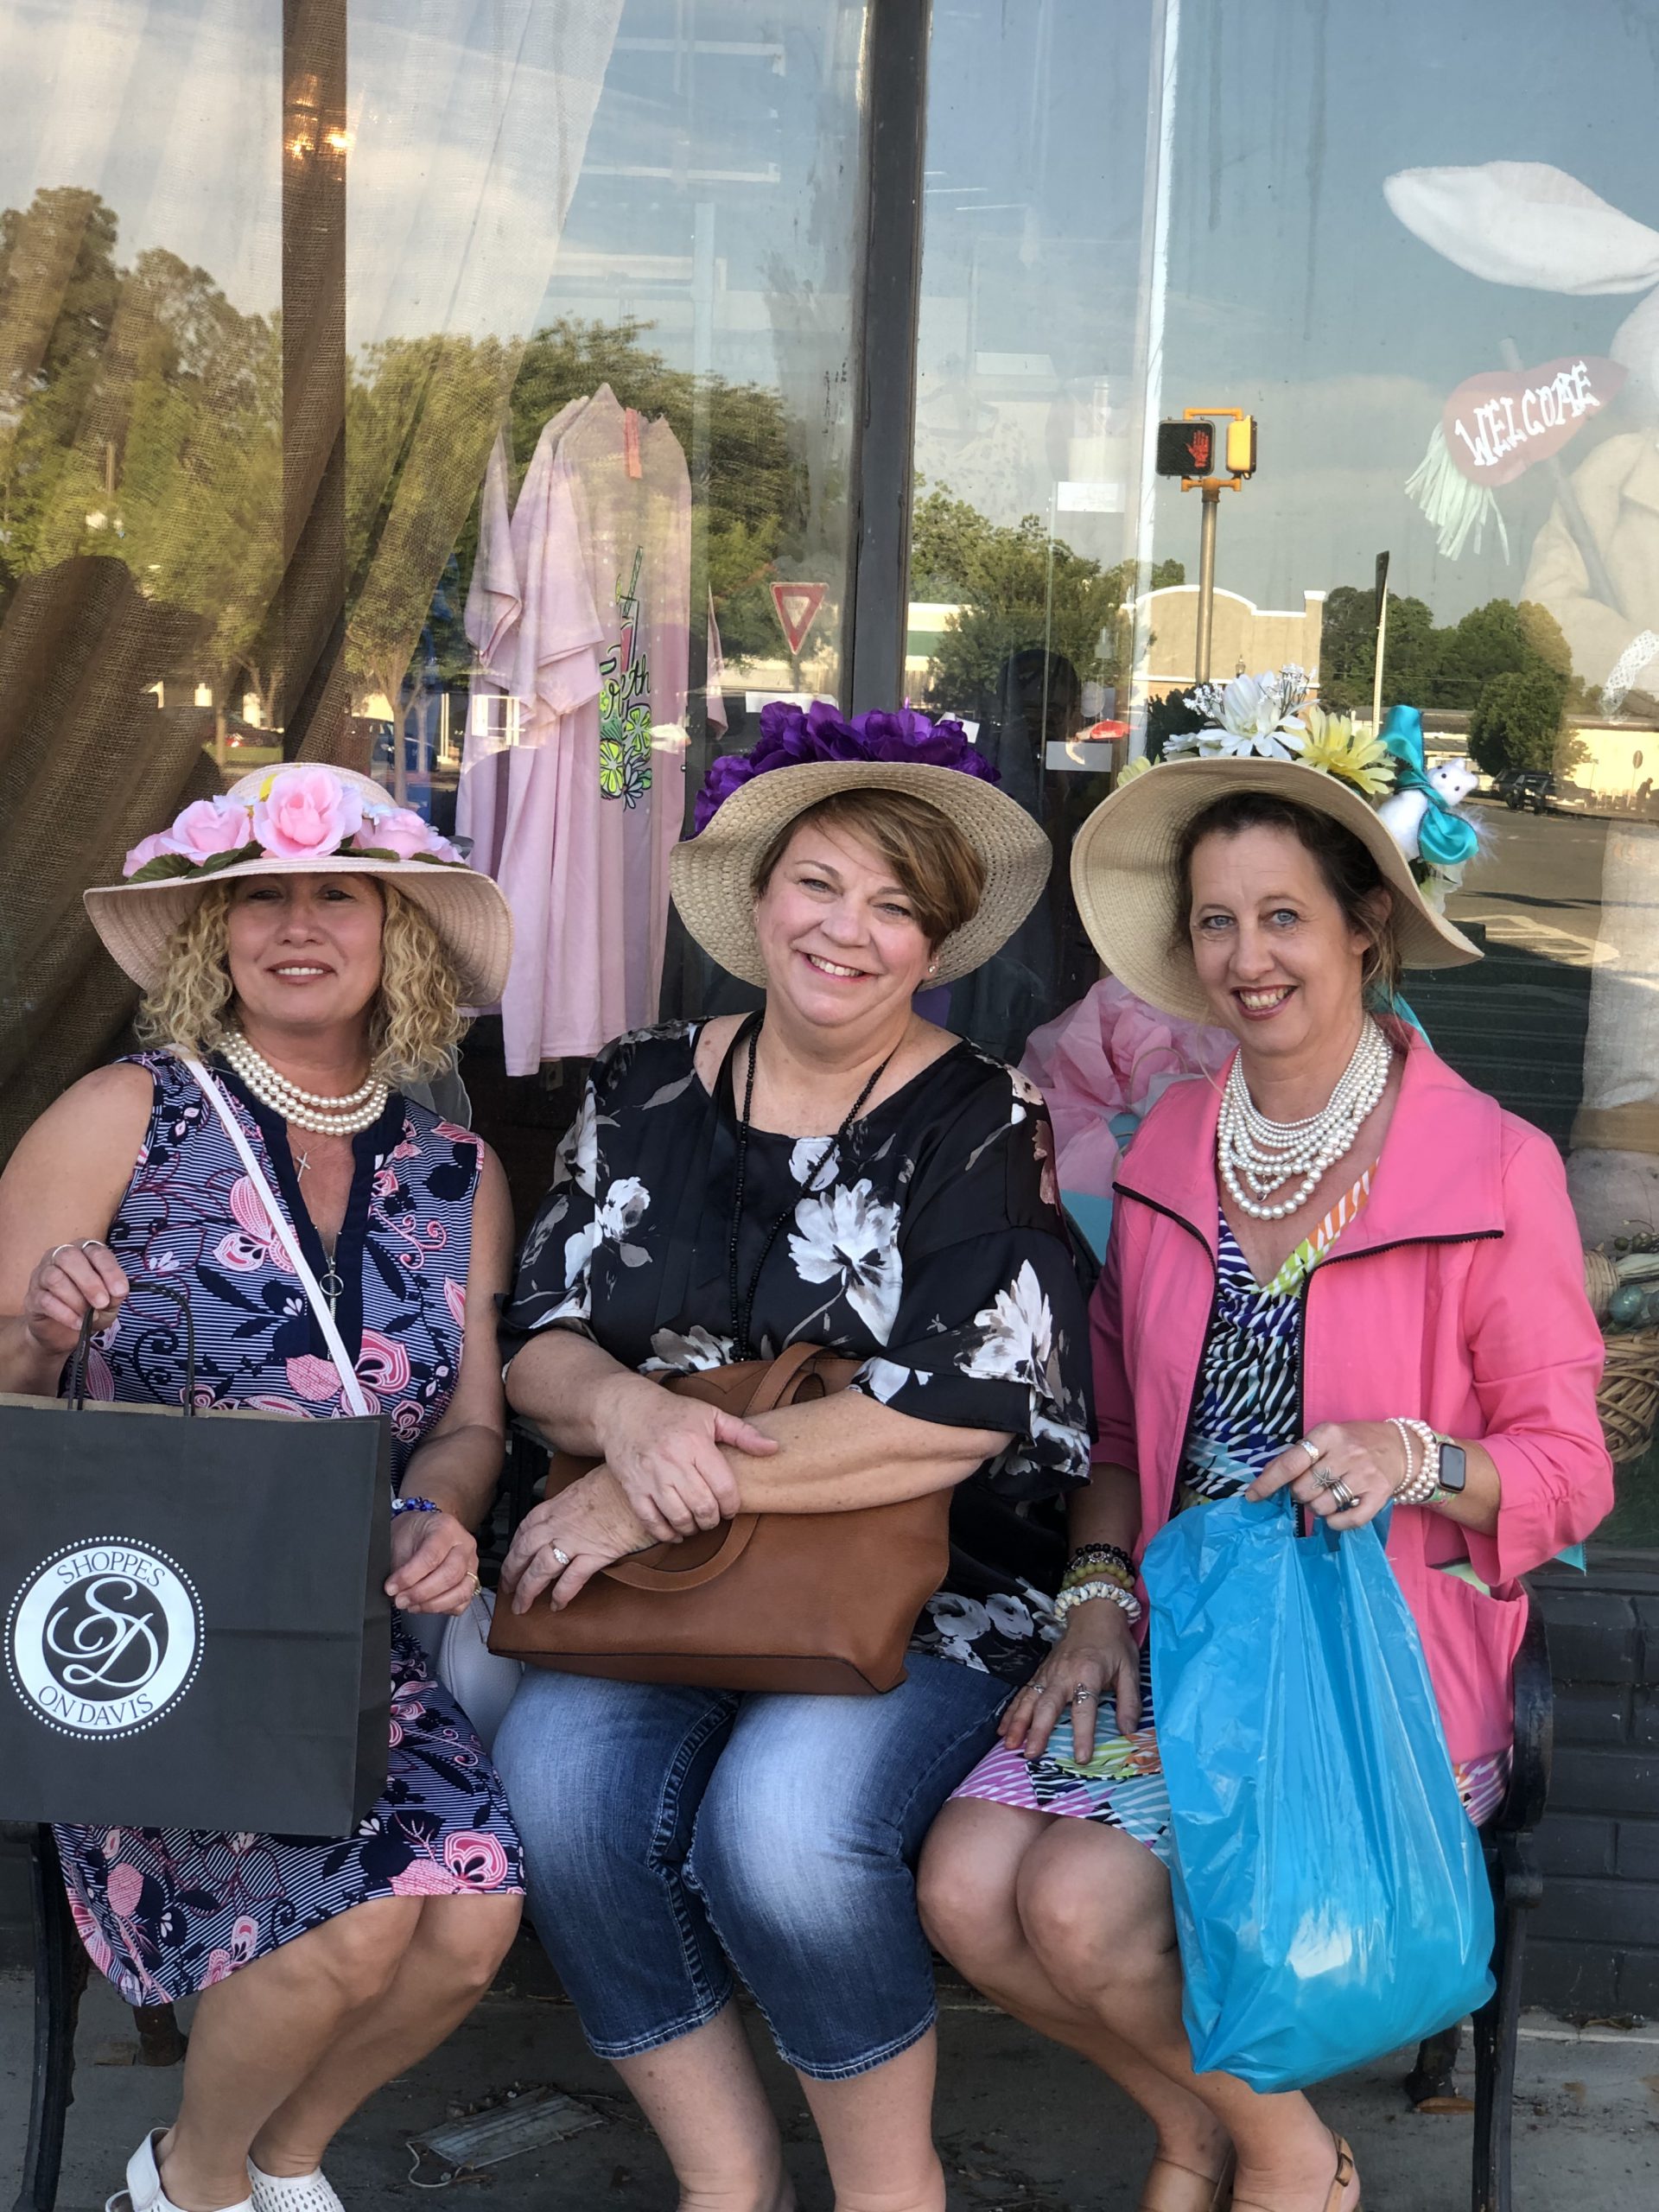 Lovely ladies enjoying the fun at Nashville's Downtown Derby Day